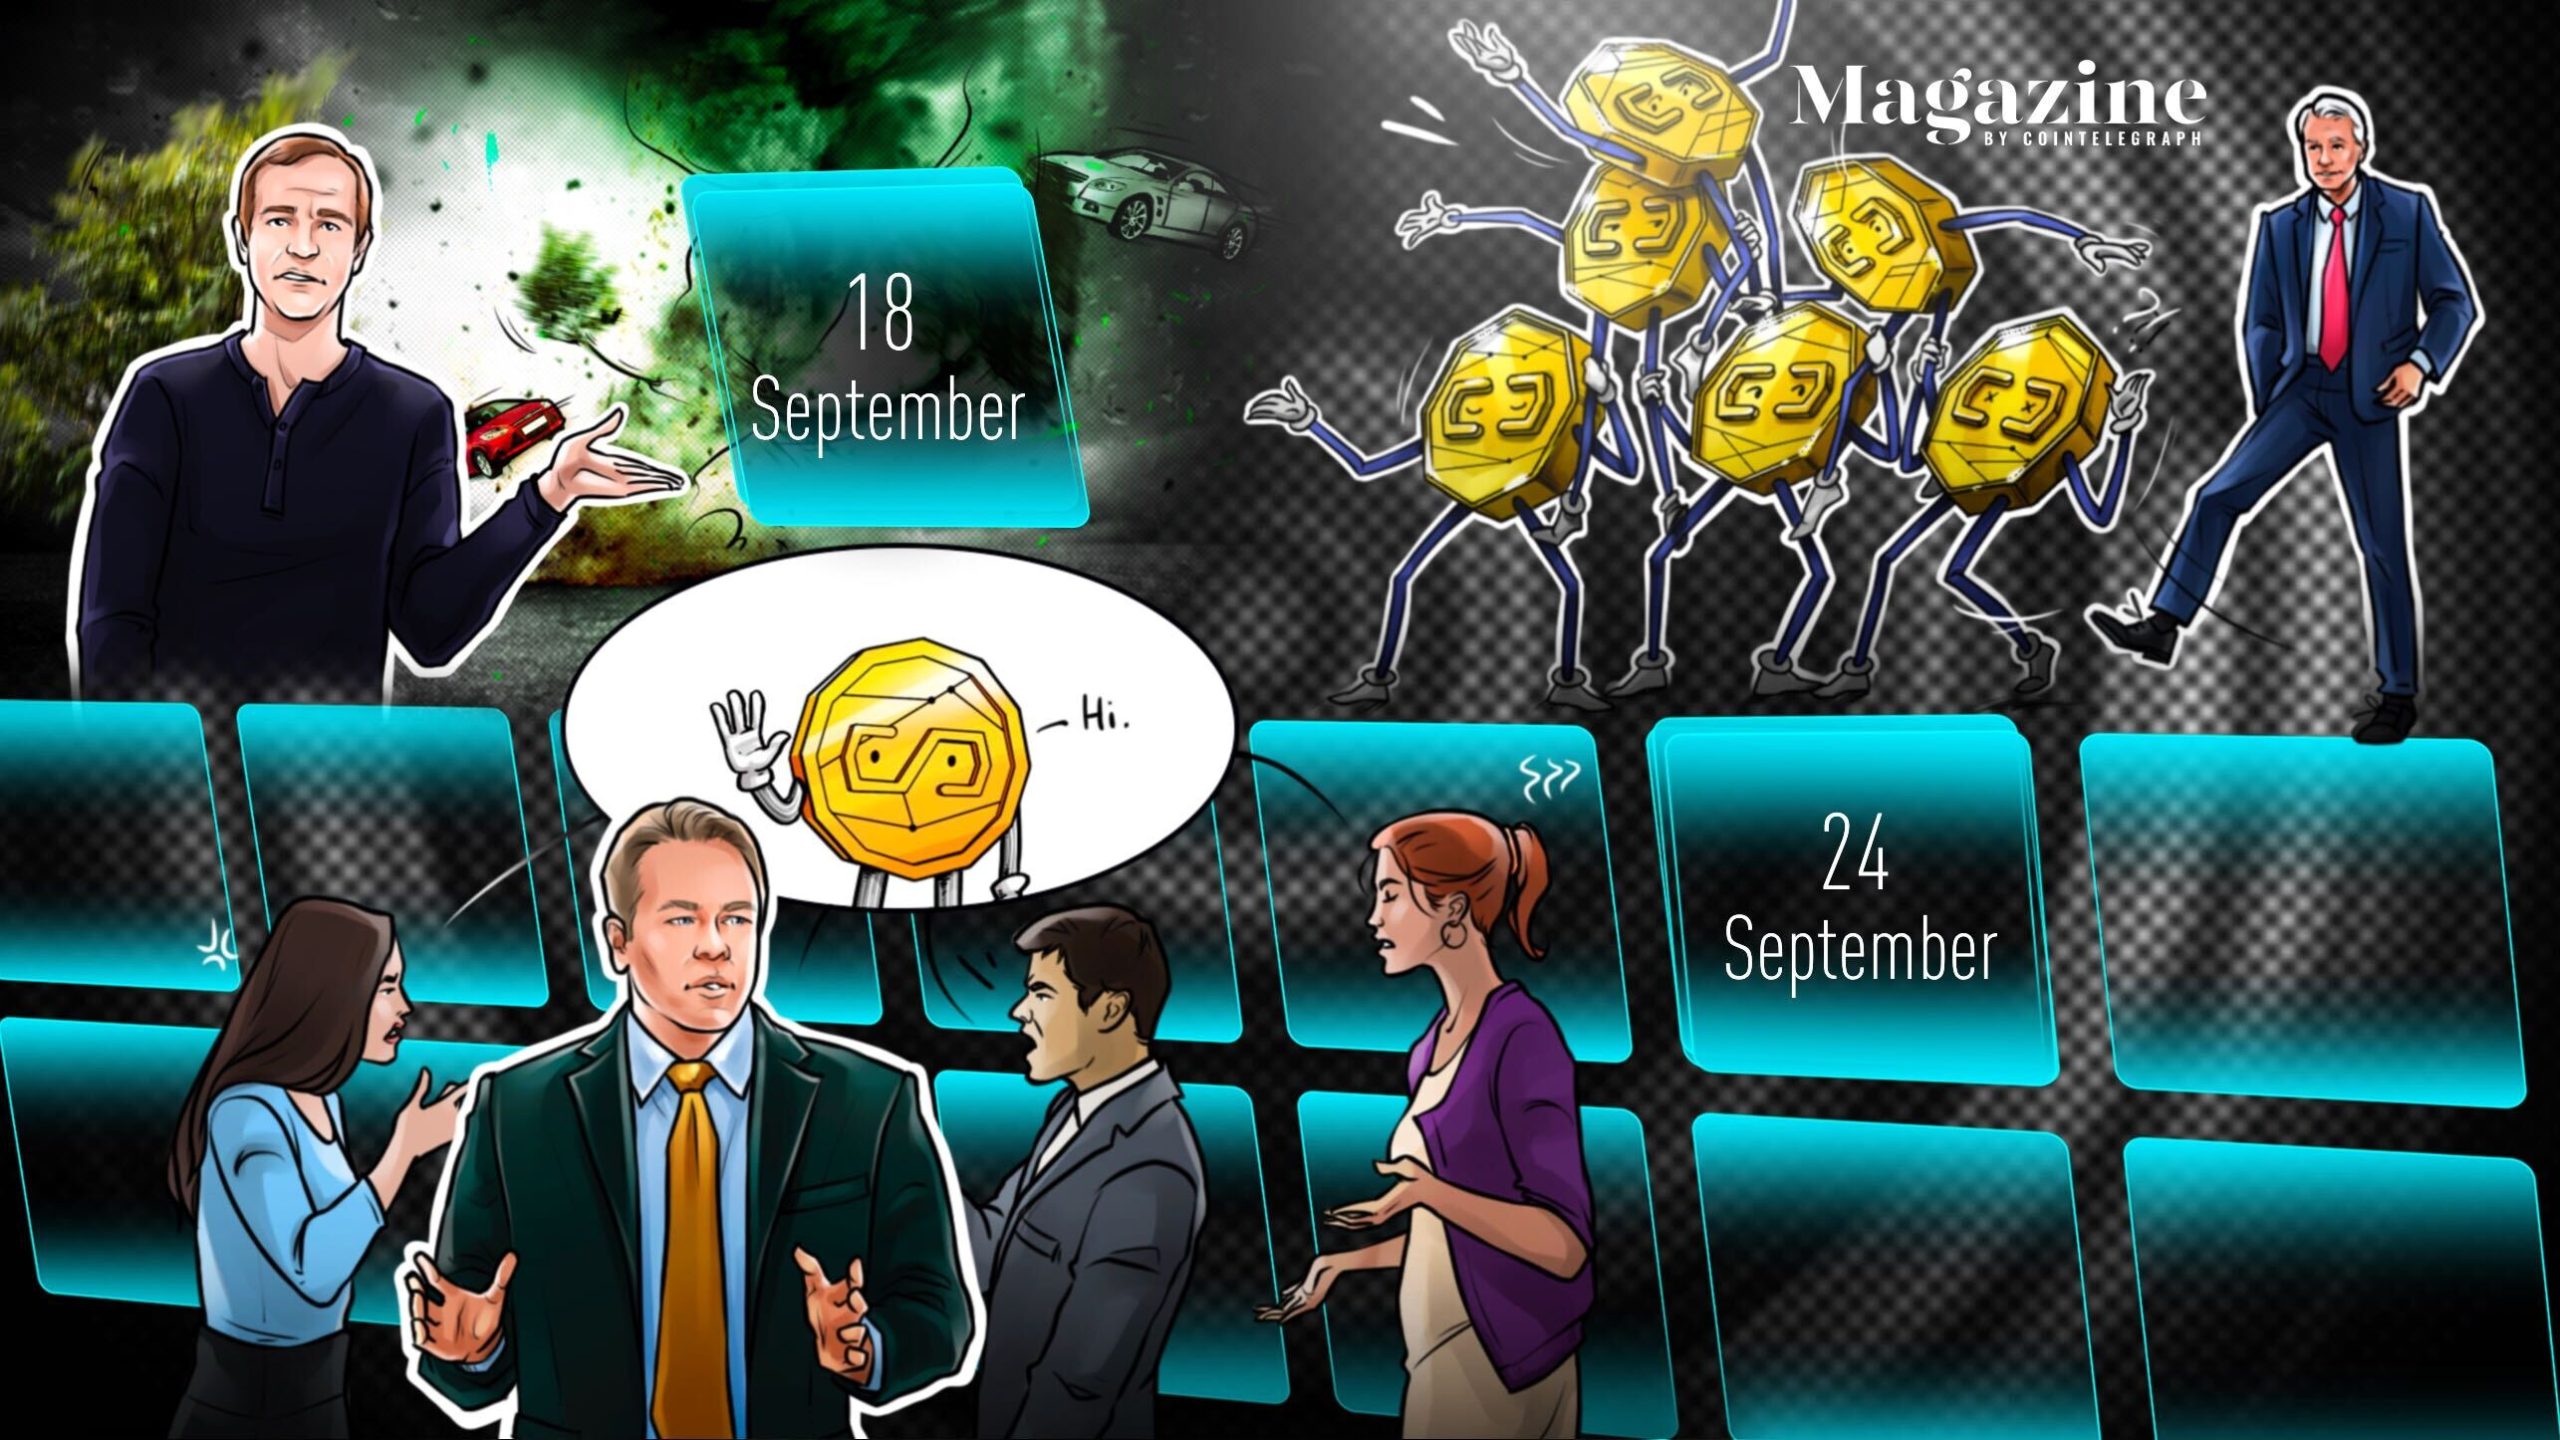 Ethereum completes merge, Do Kwon faces arrest warrant and Bitcoin dives after rally: Hodler’s Digest, Sept. 11-17